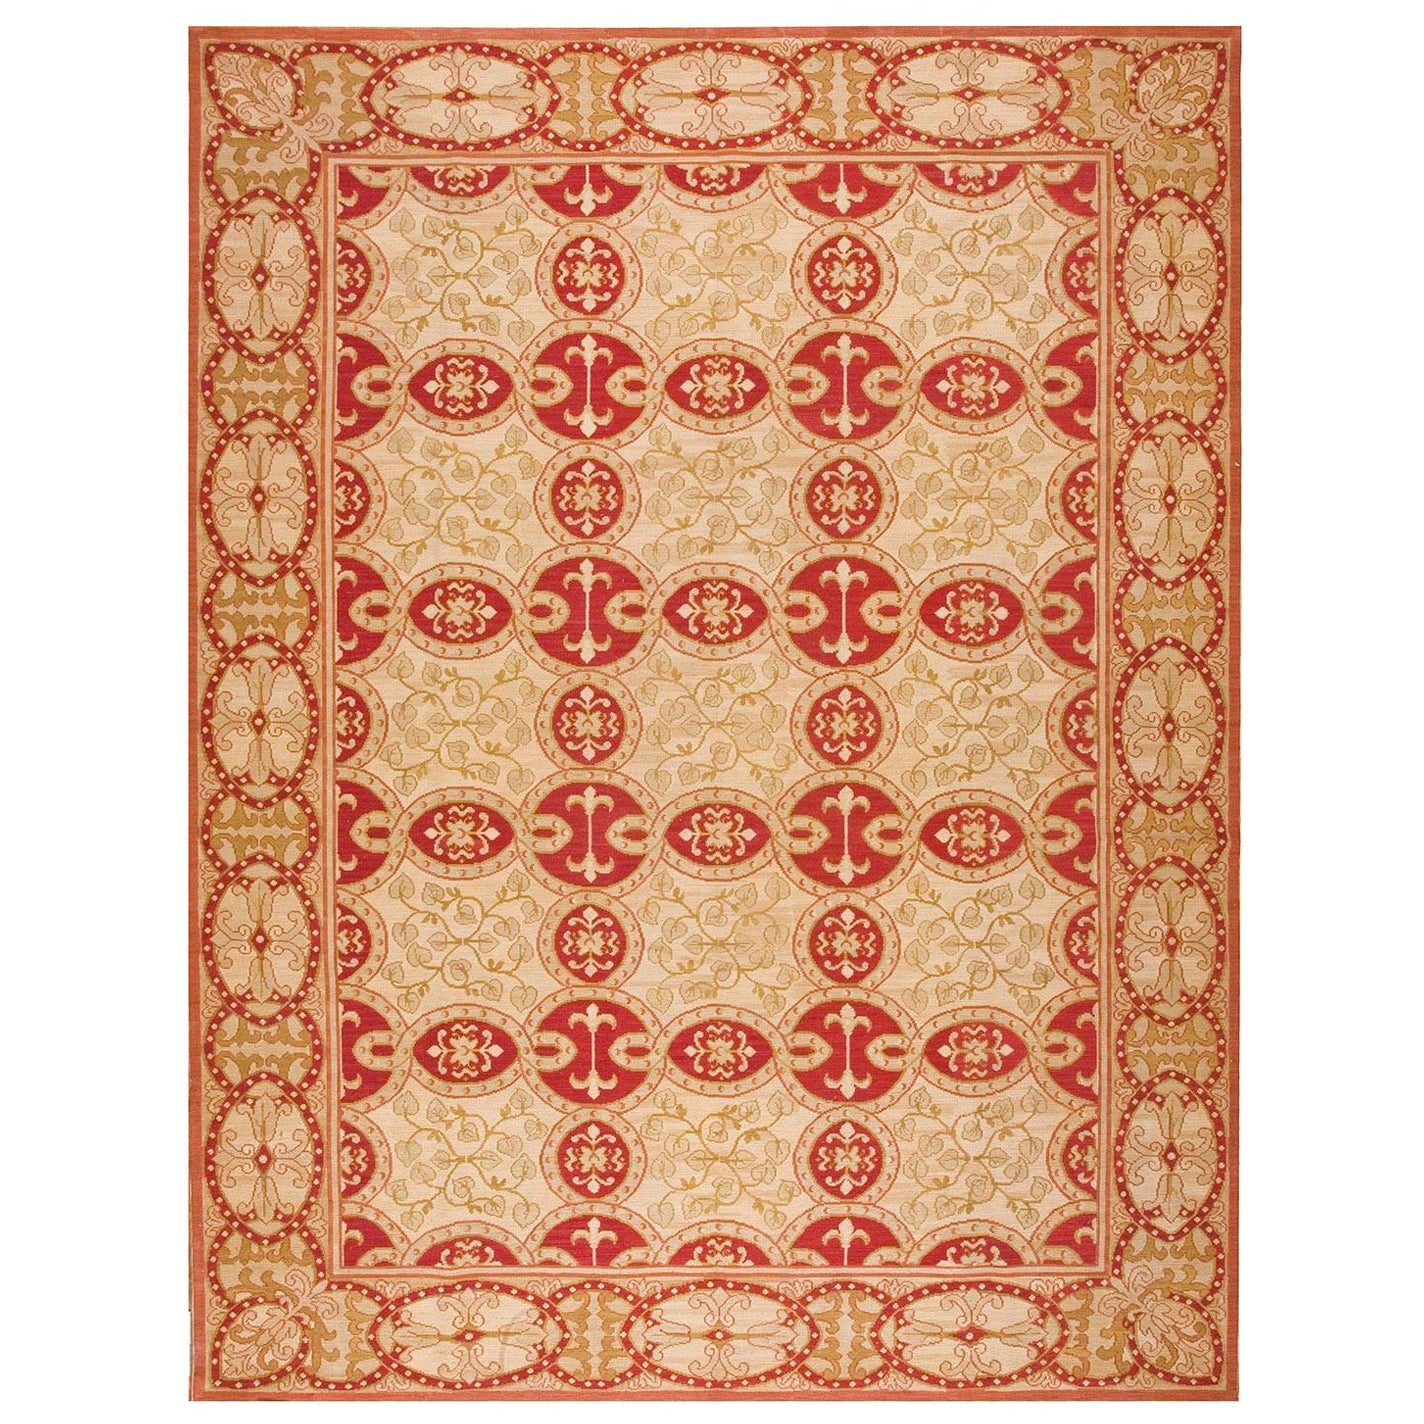  Contemporary Handwoven Needlepoint Flat Weave Carpet ( 9' x 12' - 275 x 365 cm  For Sale